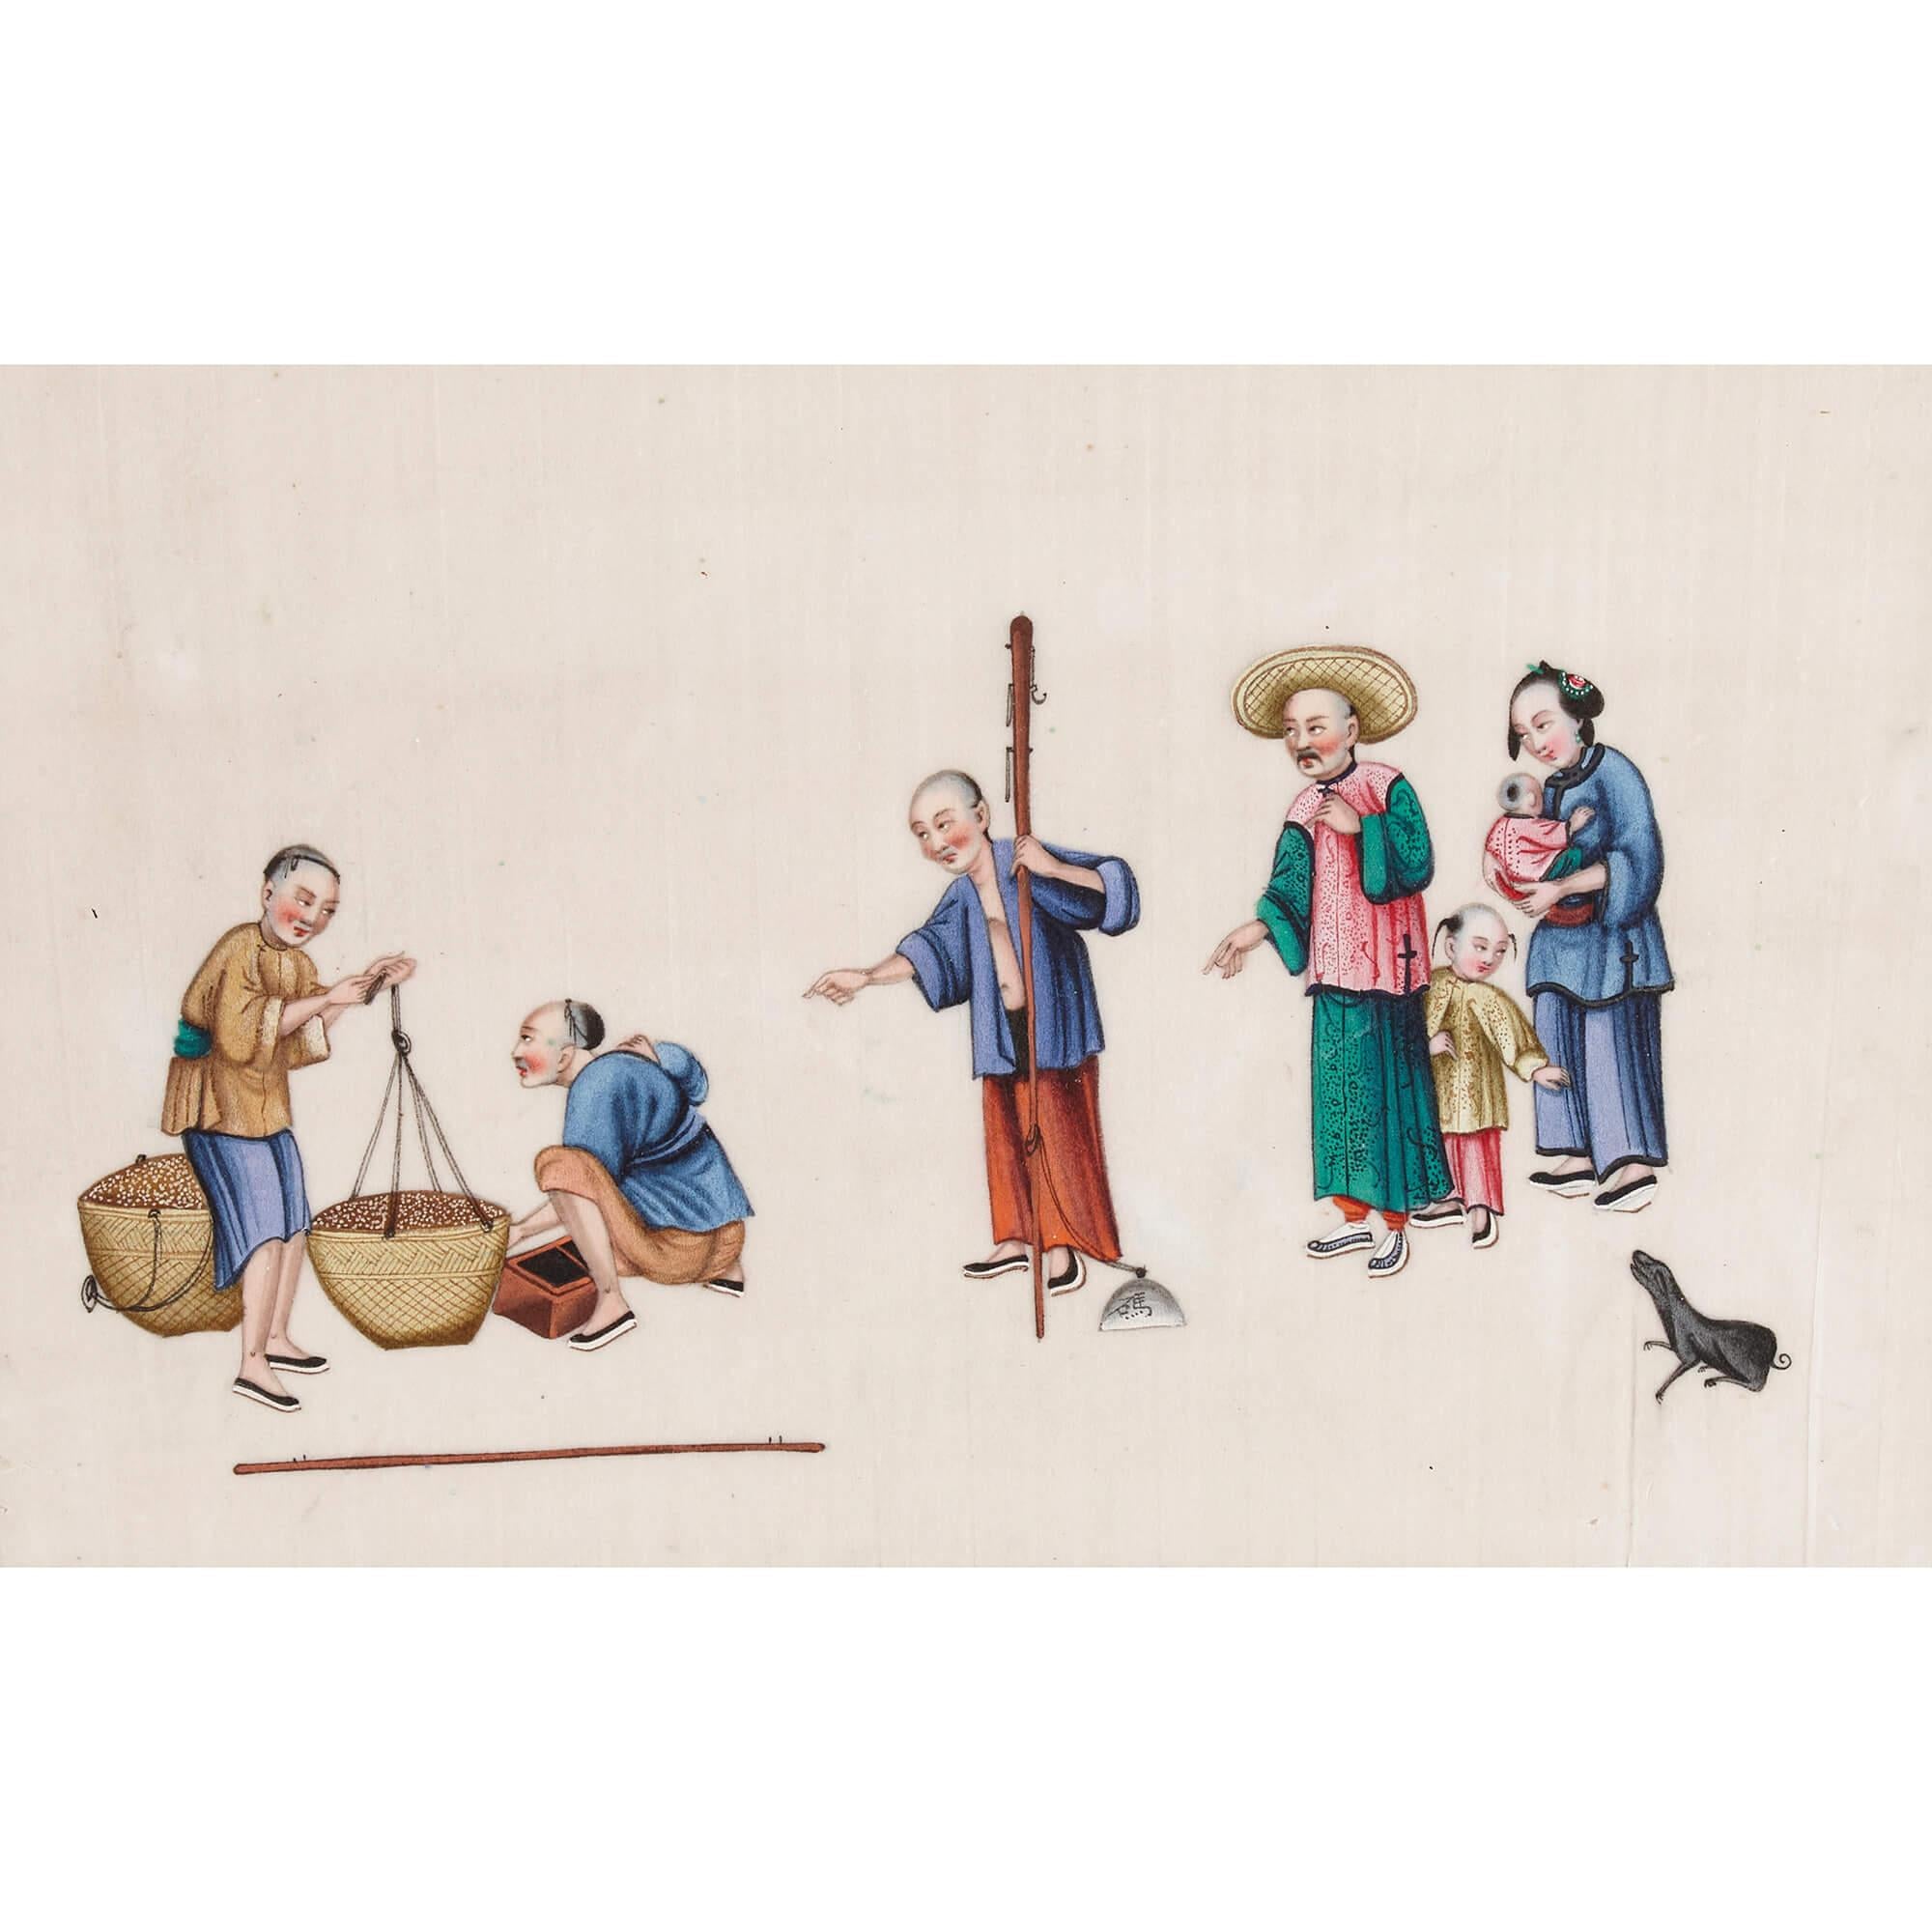 Set of Antique Chinese pith paintings depicting tea production 
Chinese, 19th Century
Panel: Height 21cm, width 33cm
Frame: Height 37cm, width 49cm, depth 1.5cm

These six painted vignettes expertly depict the process of tea production, capturing a